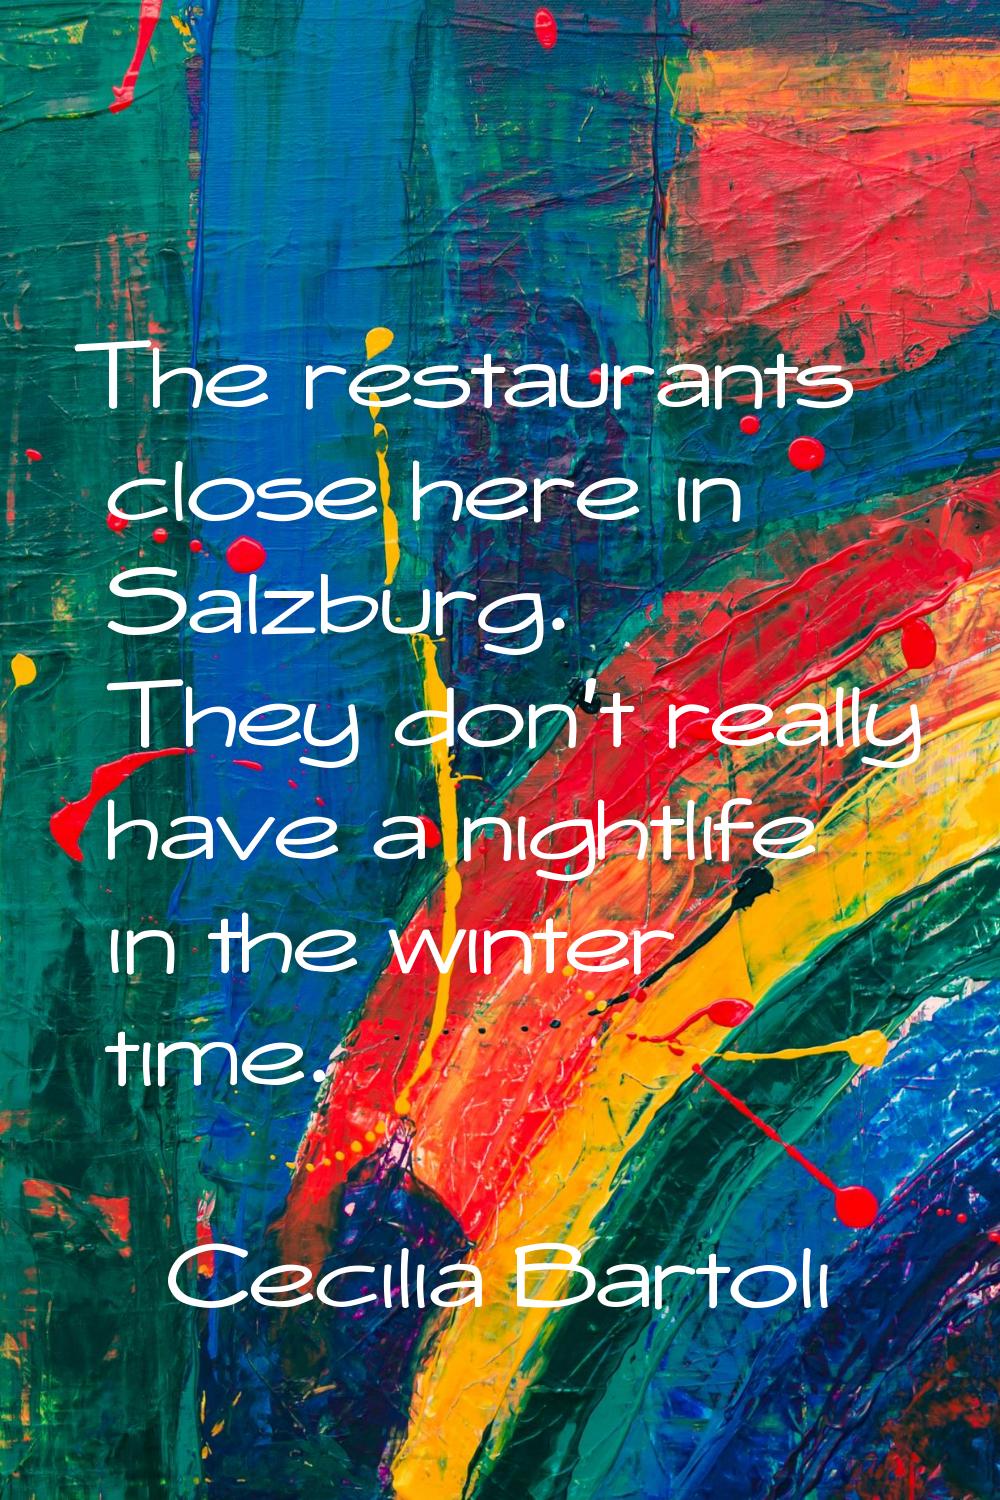 The restaurants close here in Salzburg. They don't really have a nightlife in the winter time.